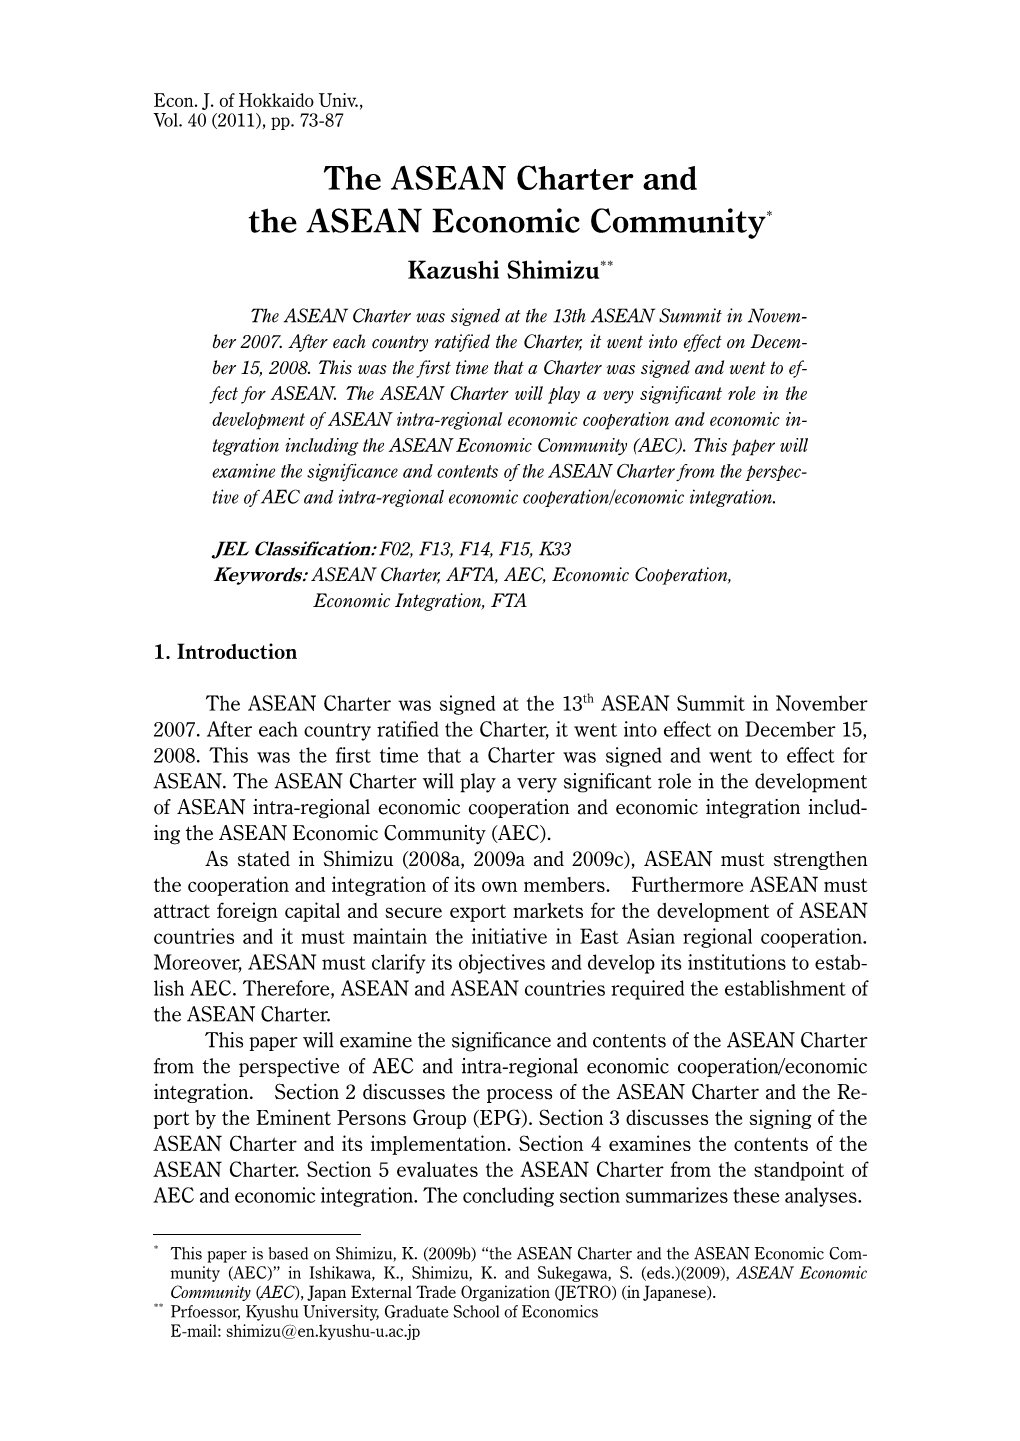 The ASEAN Charter and the ASEAN Economic Community*